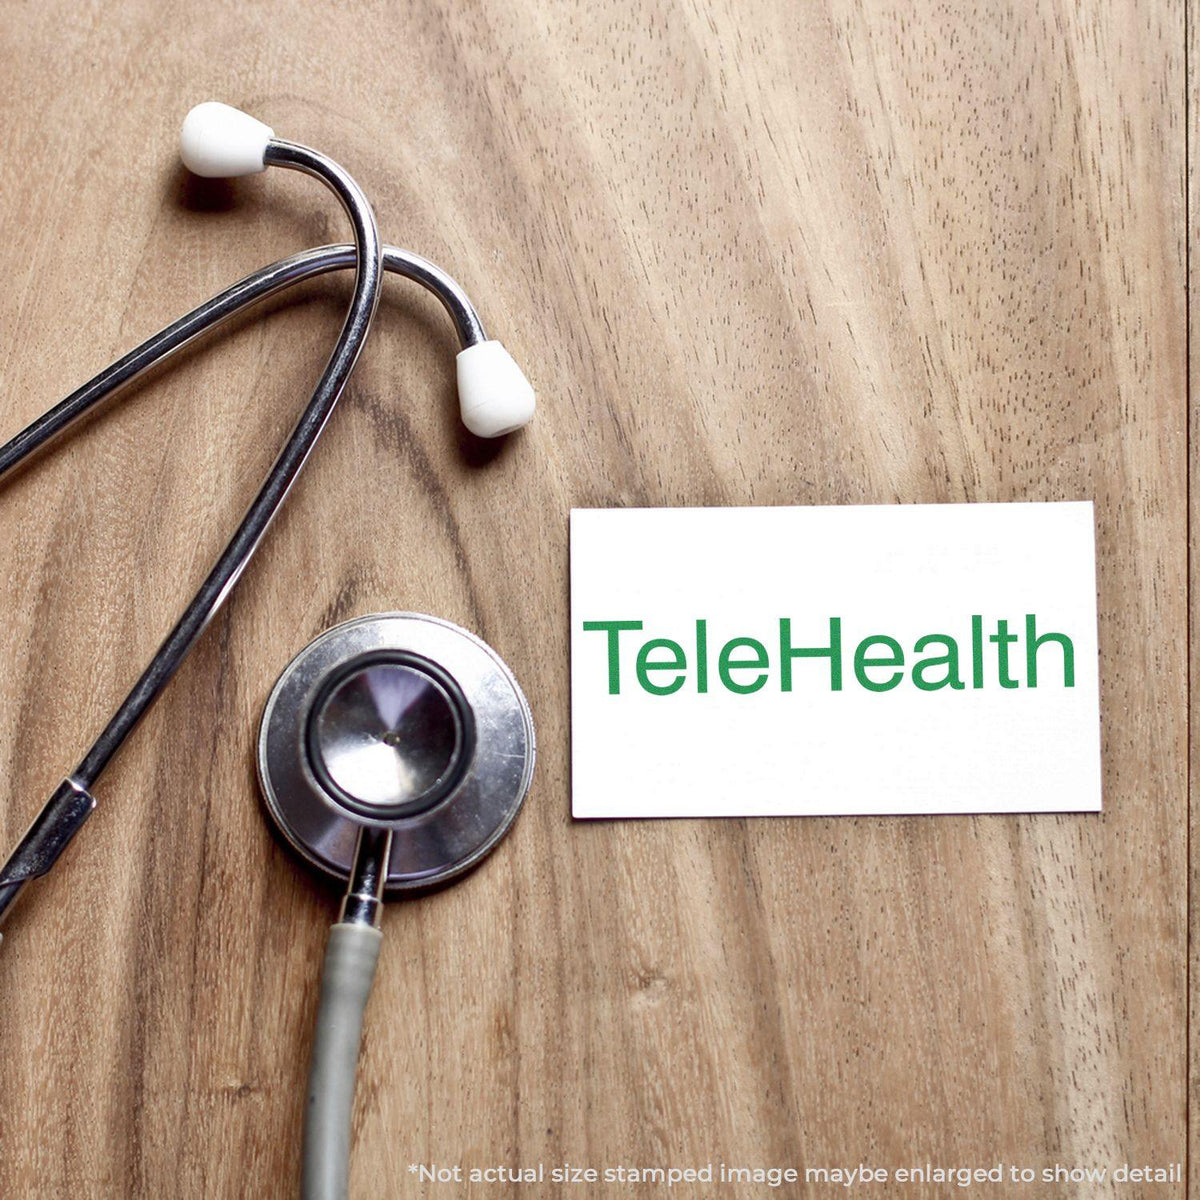 In Use Telehealth Rubber Stamp Image